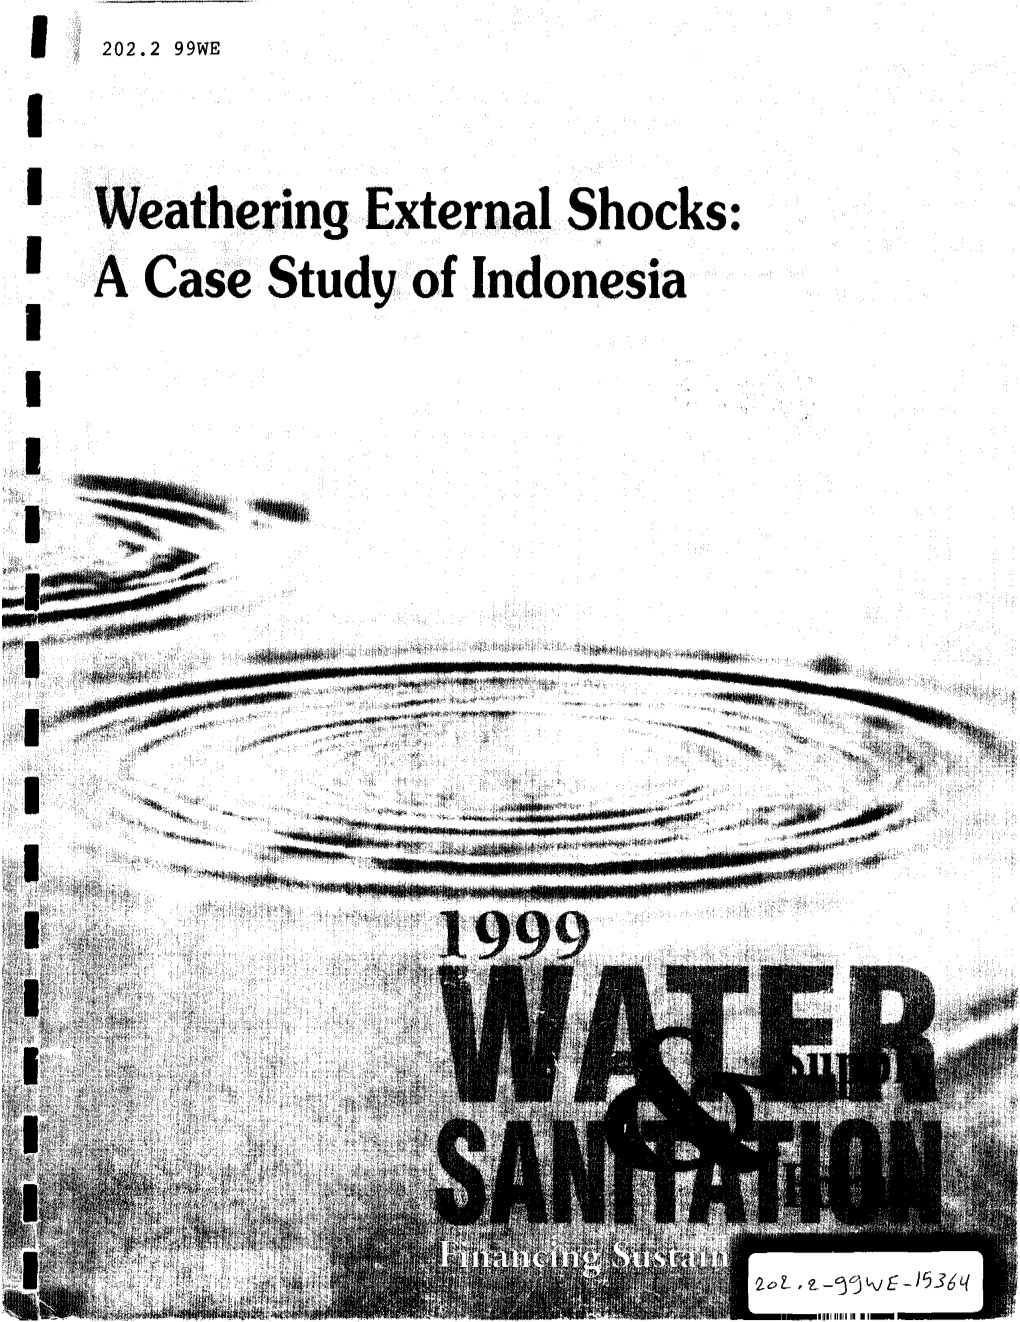 II Weathering External Shocks: a Case Study of Indonesia